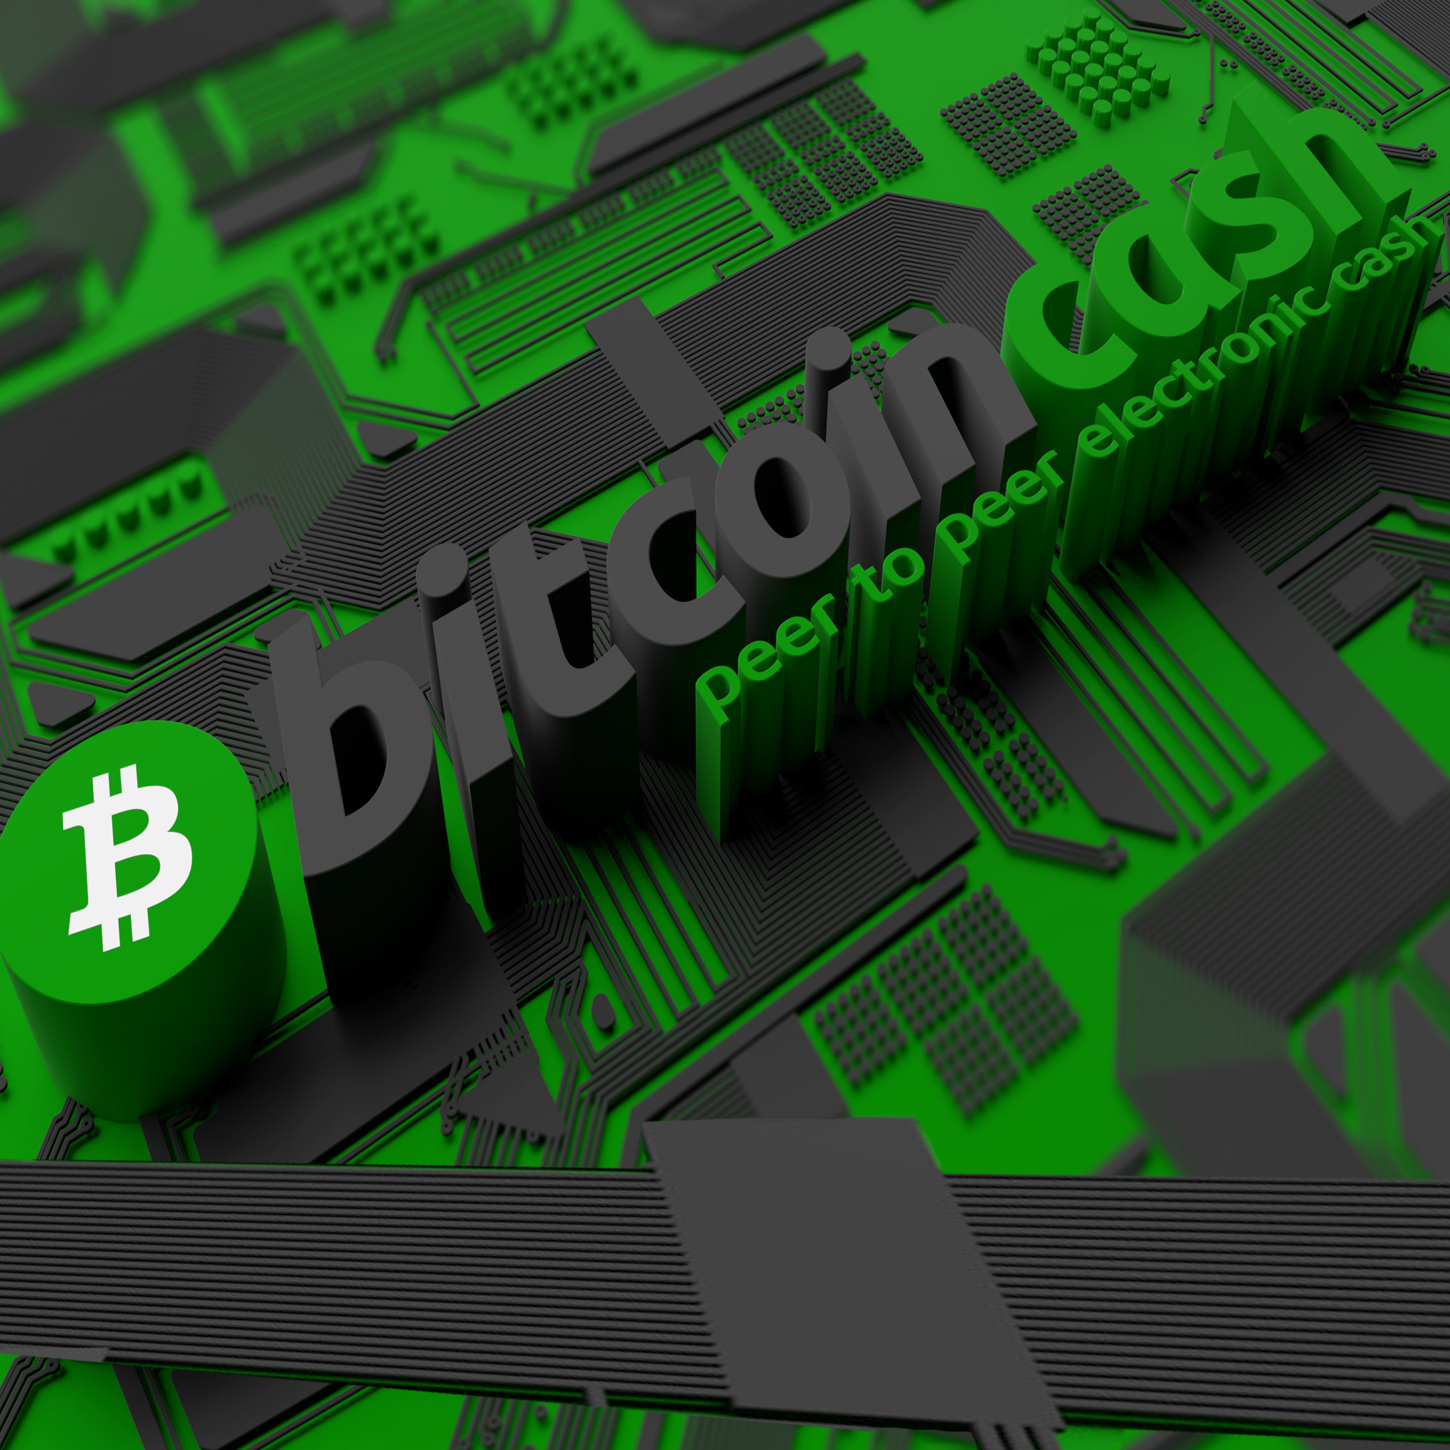 BCH Markets & Infrastructure Roundup: Optimism in the Air